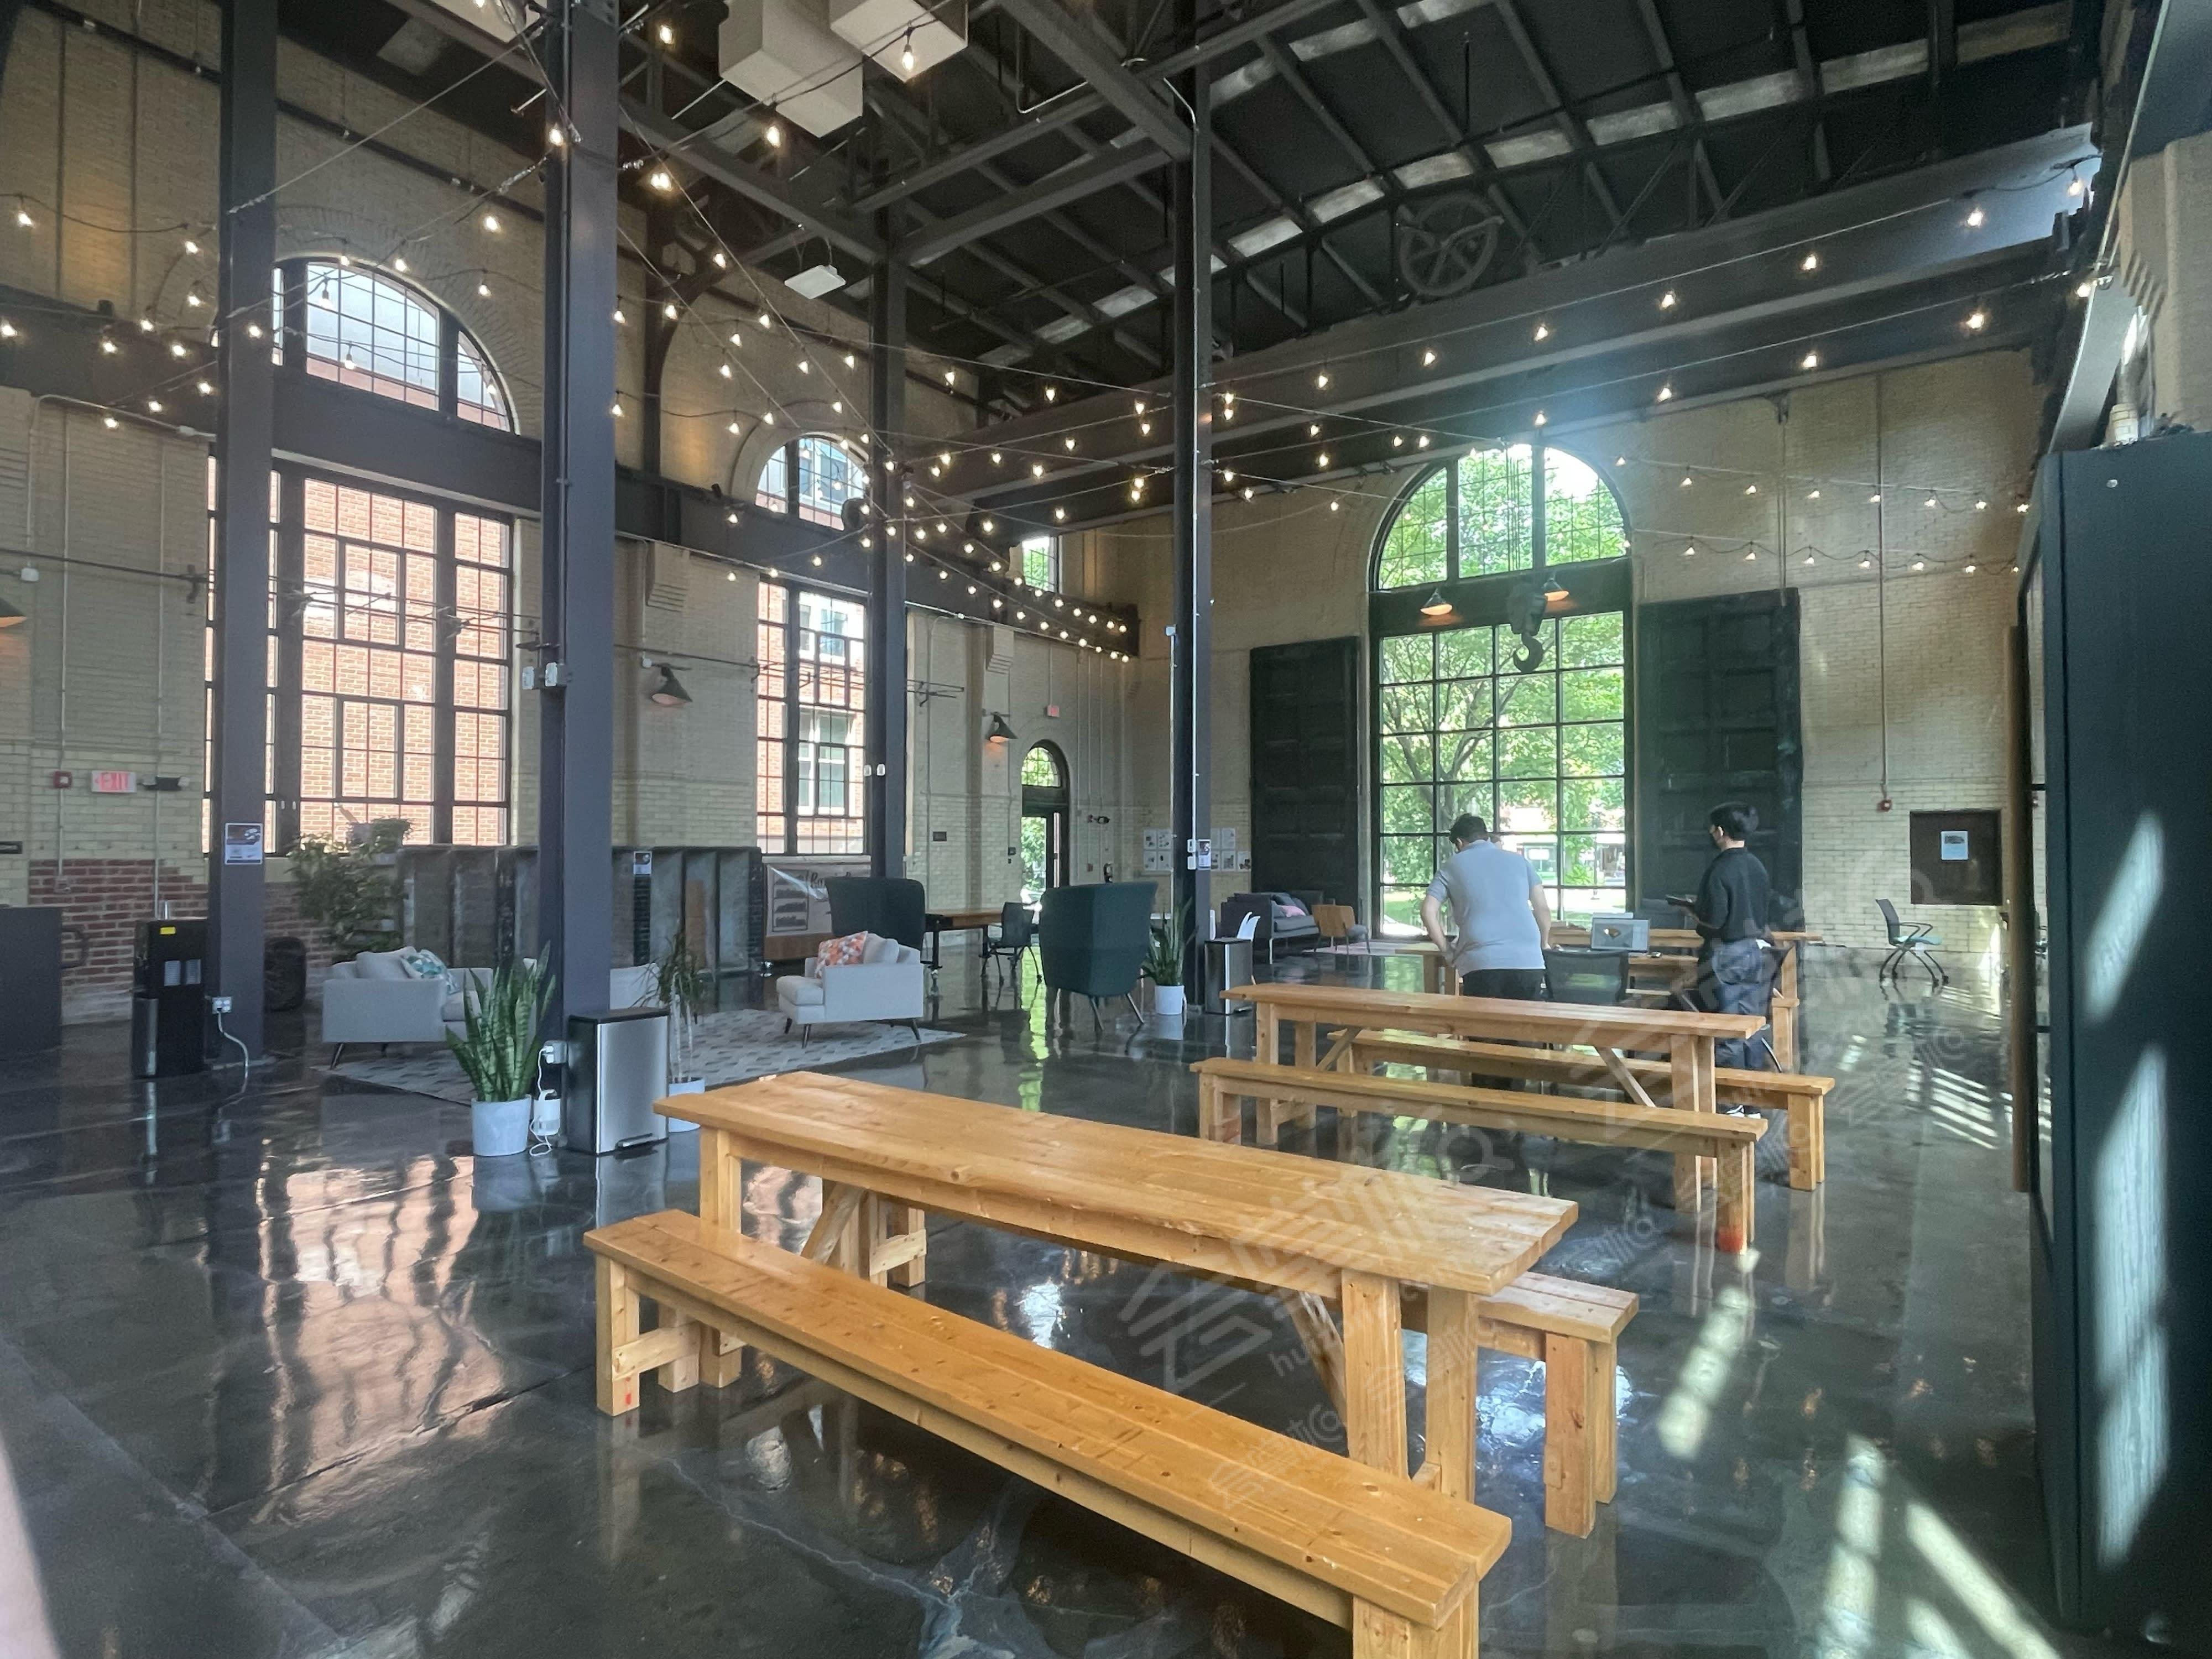 Iconic, Industrial Event Space in a Historic Building